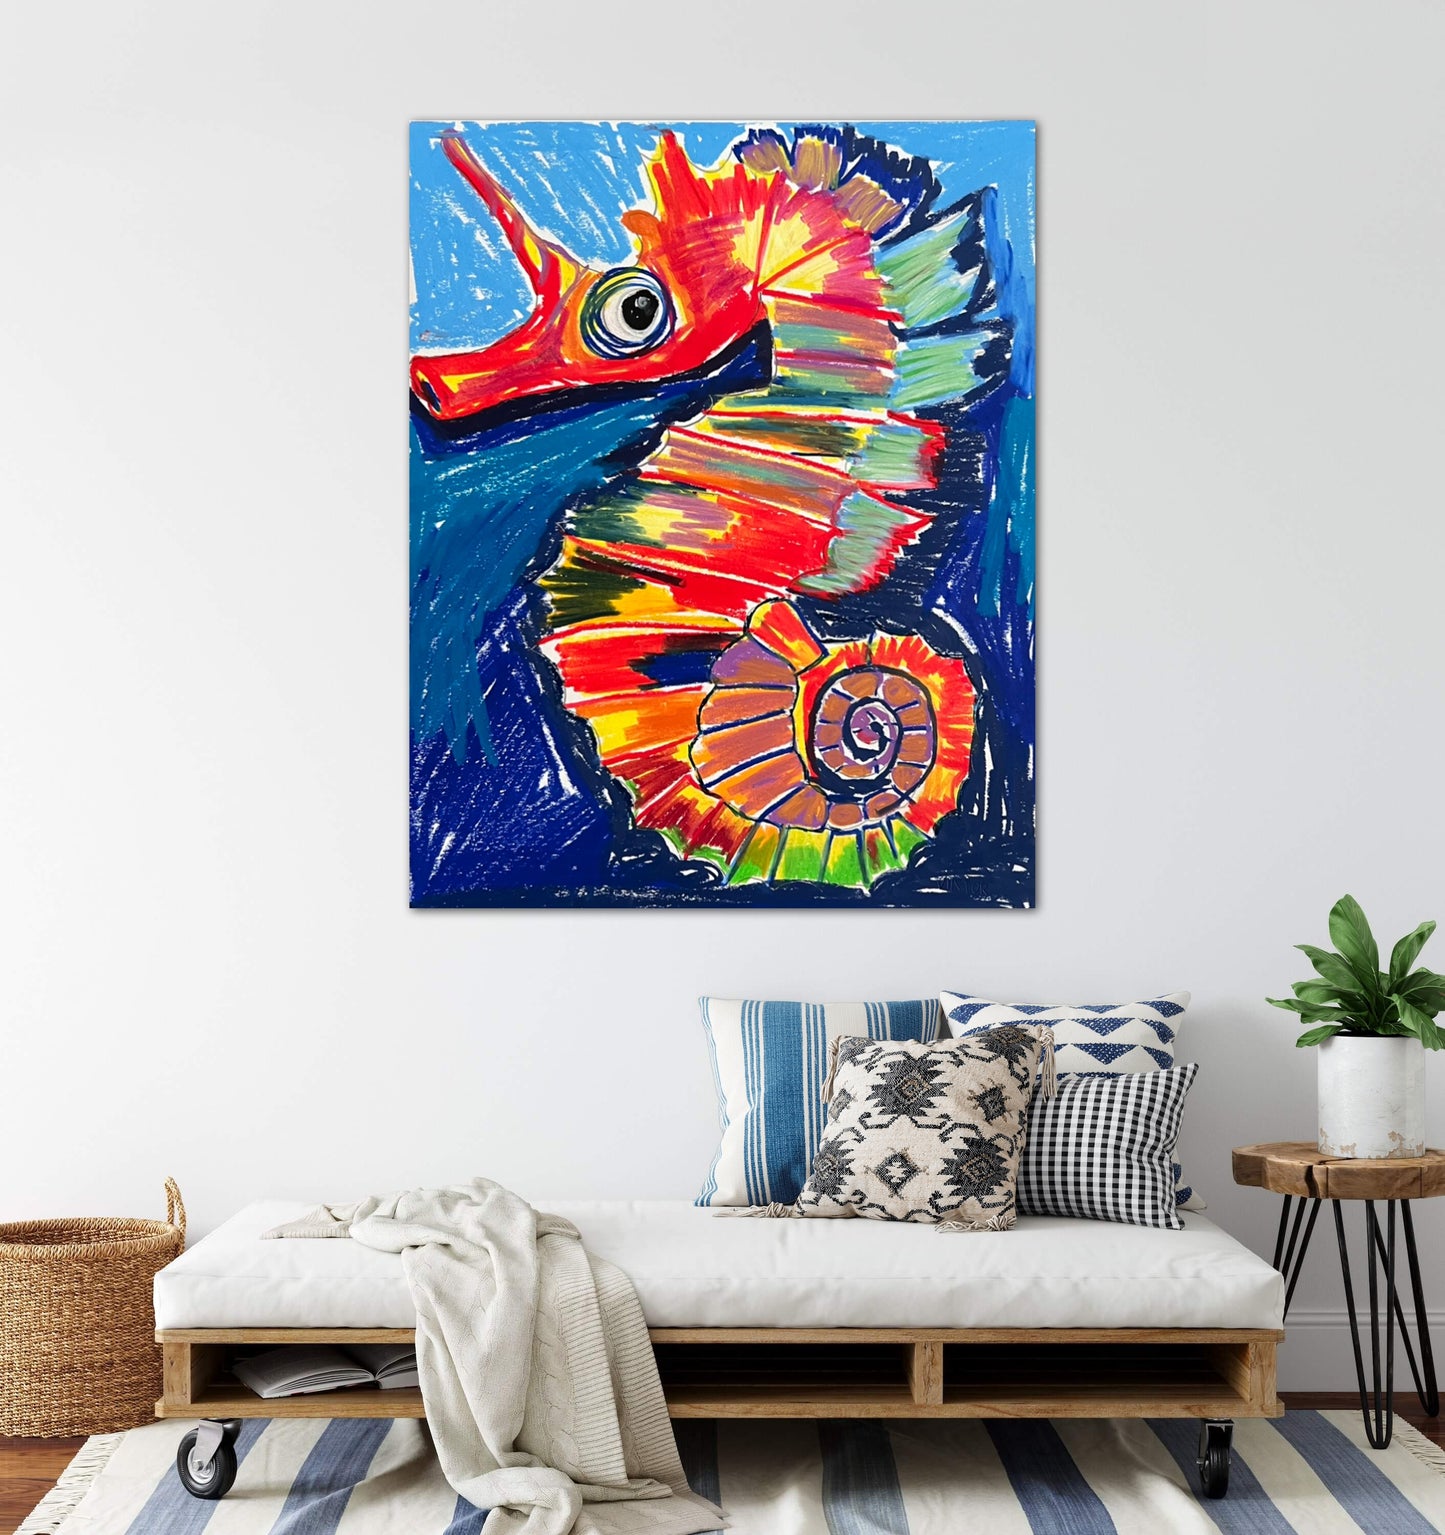 The Colorful Seahorse - Print, Poster, Stretched Canvas Print